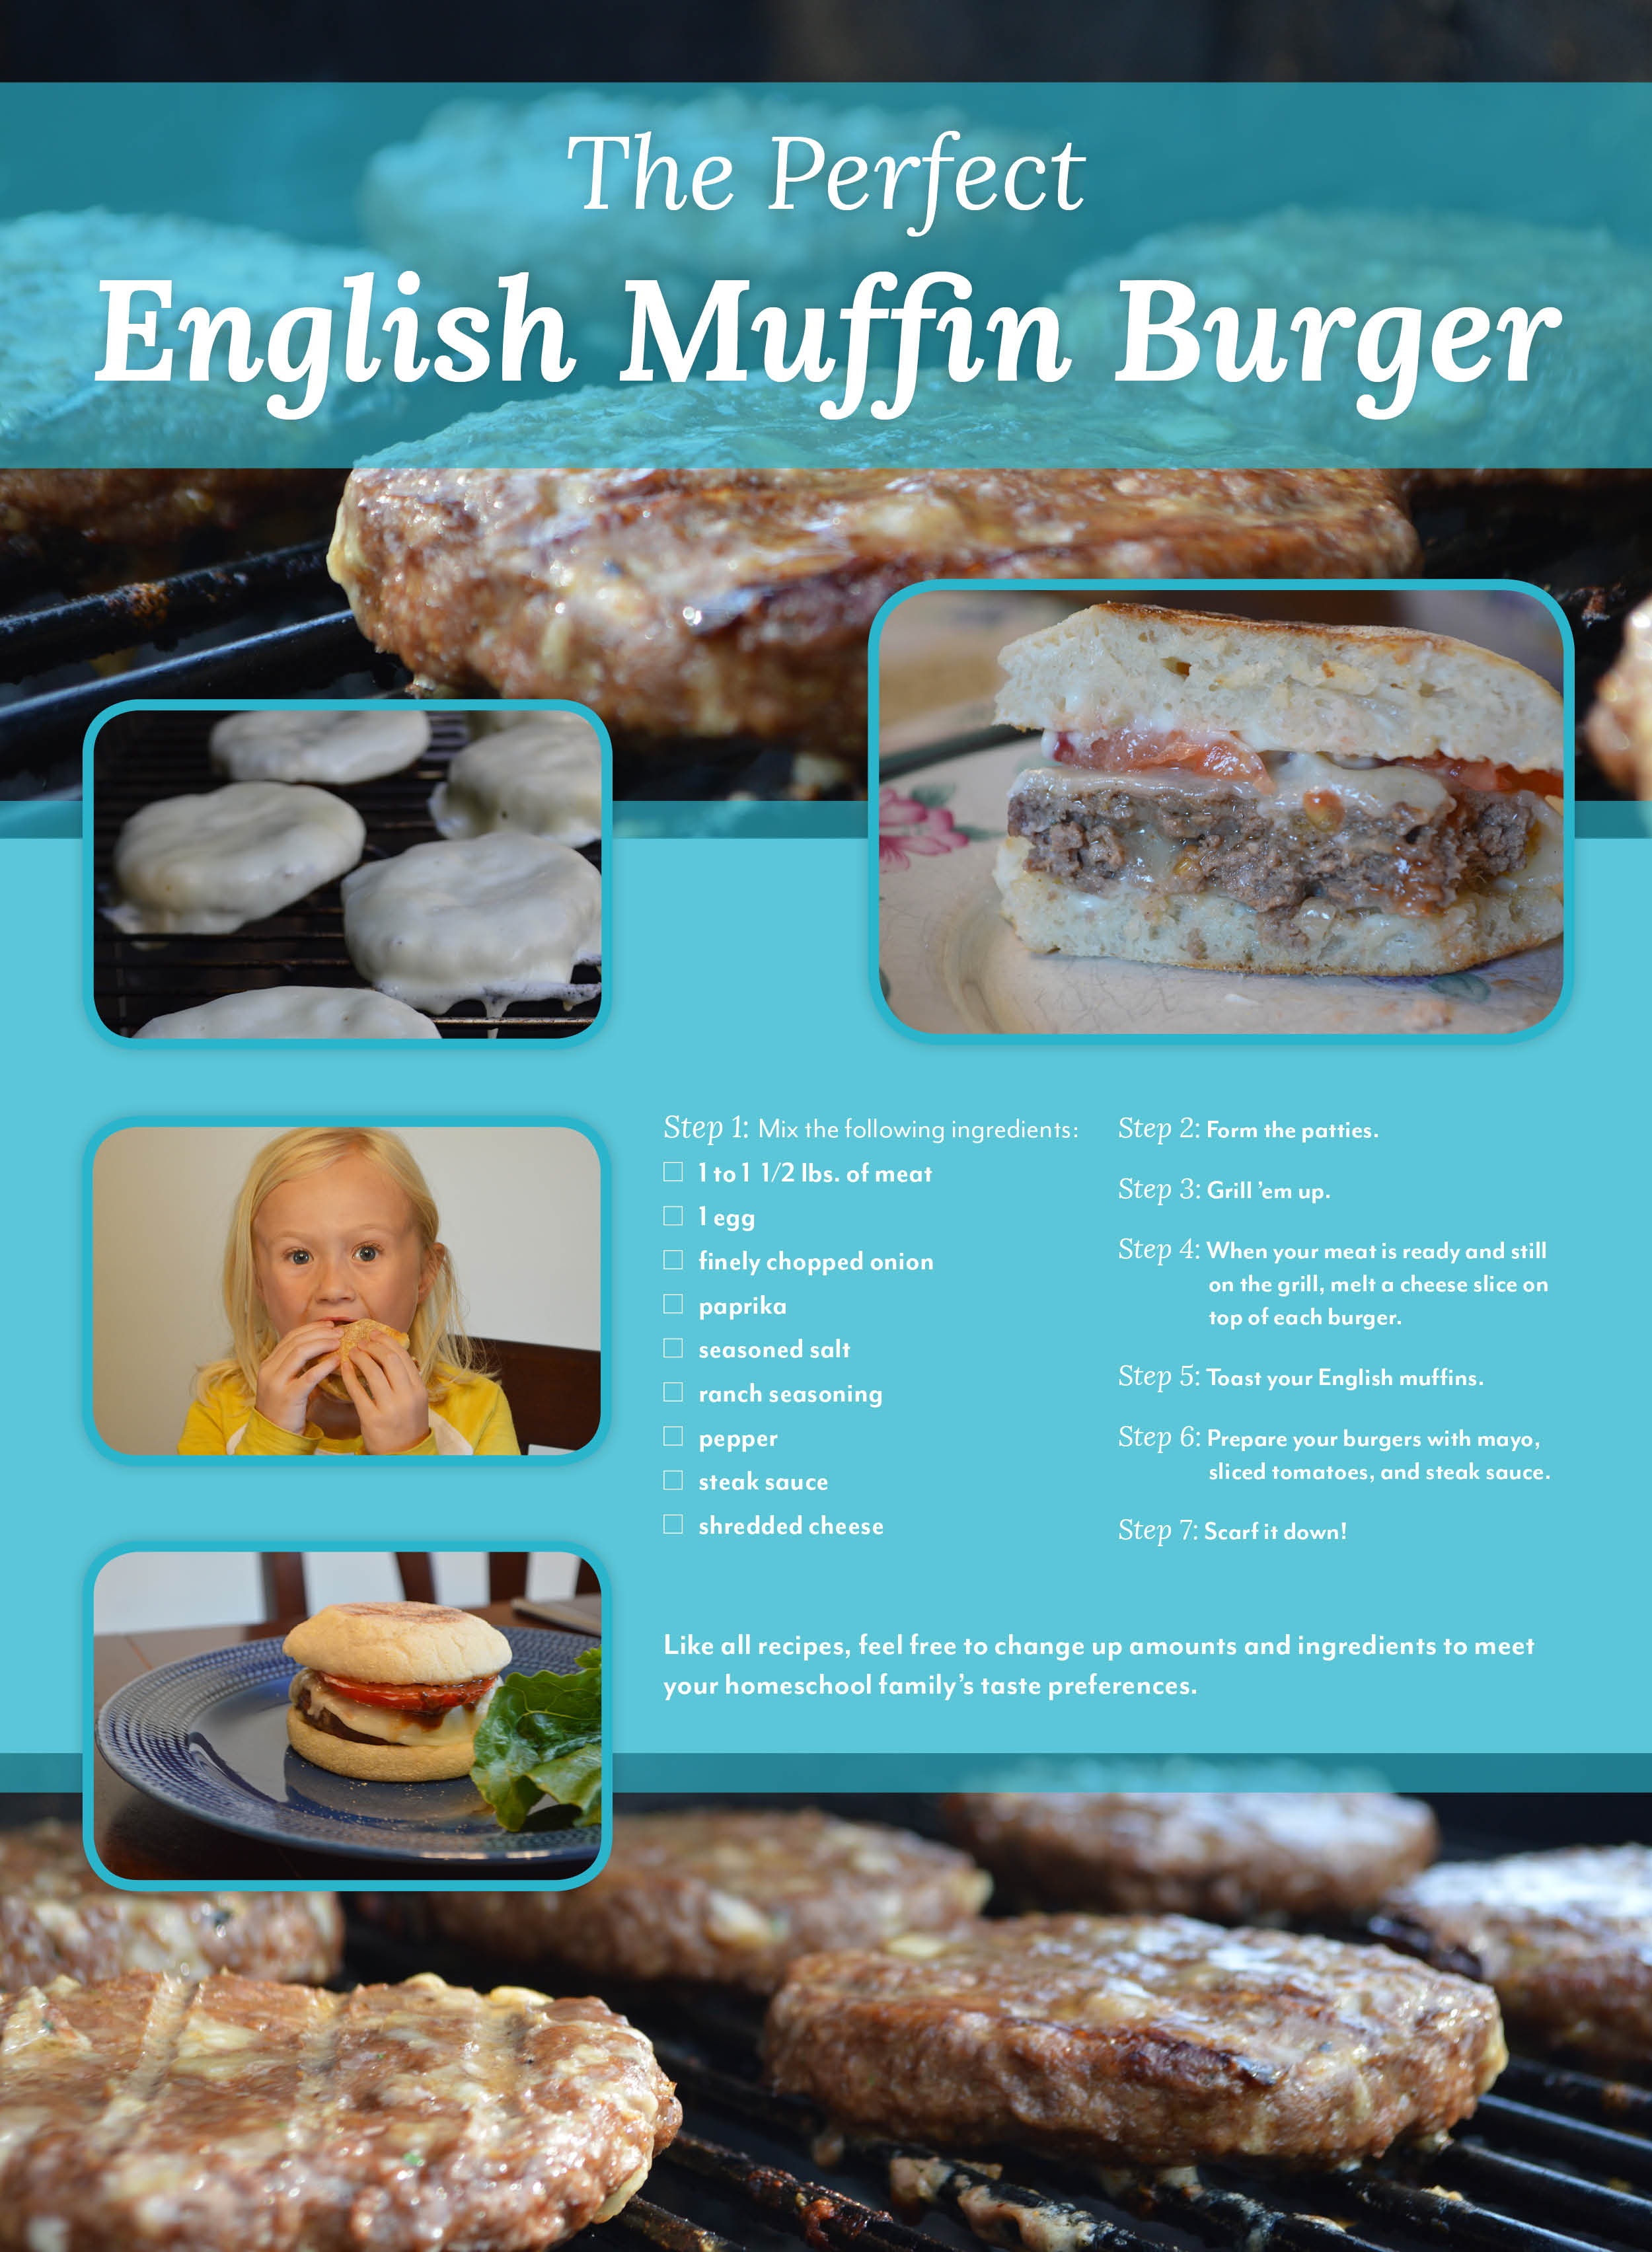 The Perfect English Muffin Burger